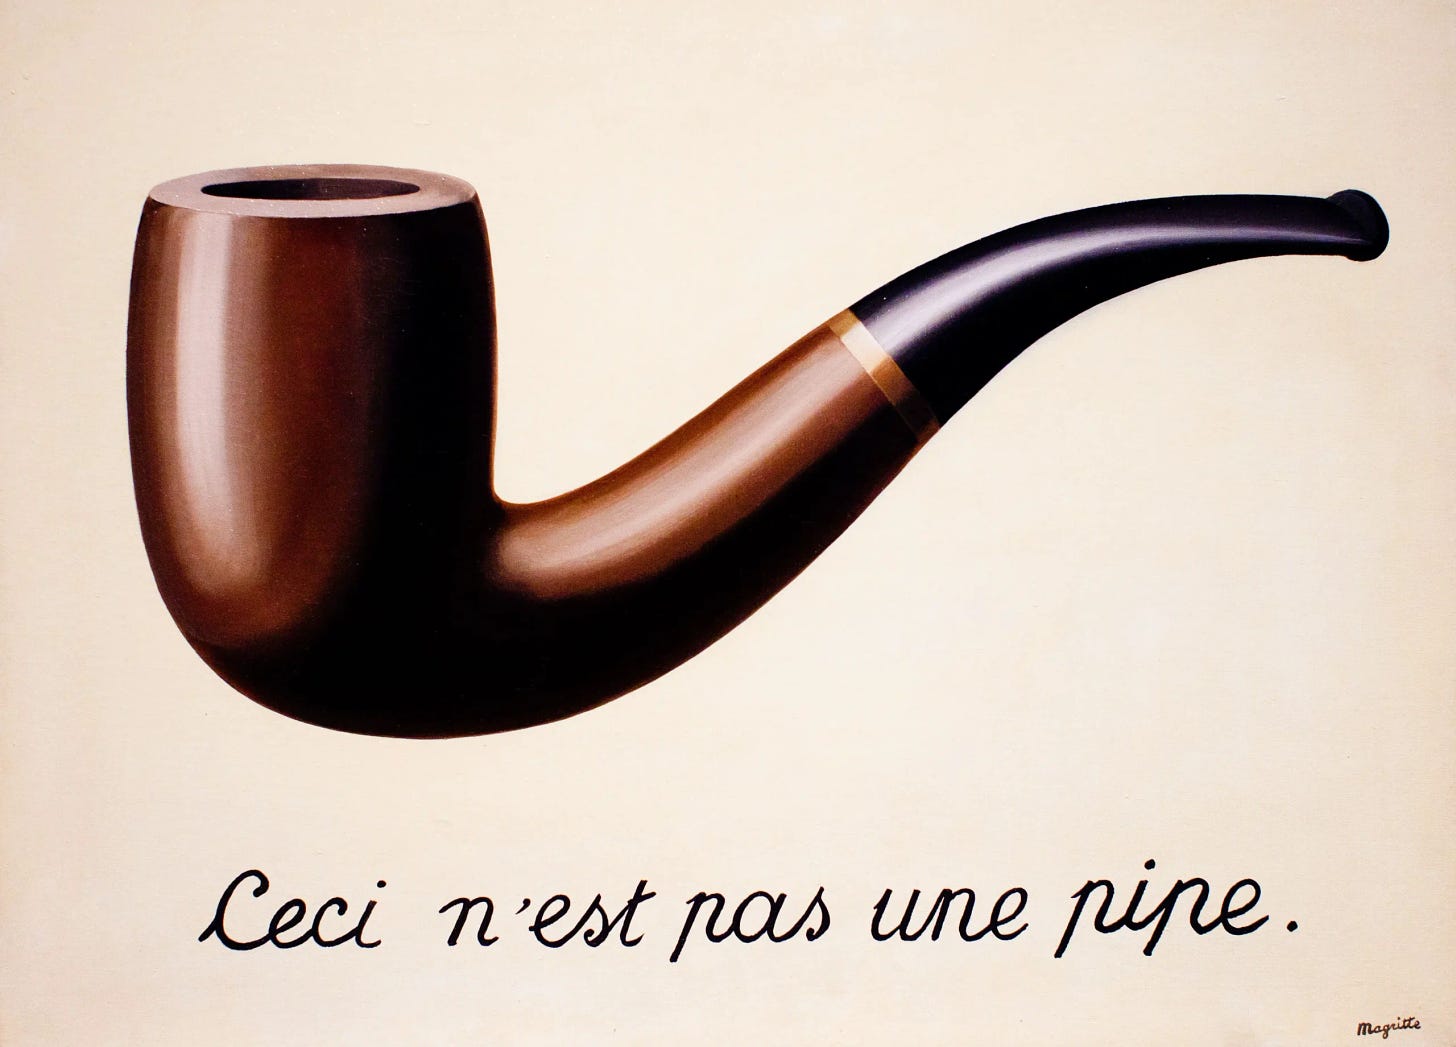 This is not a pipe – Magritte's most famous painting